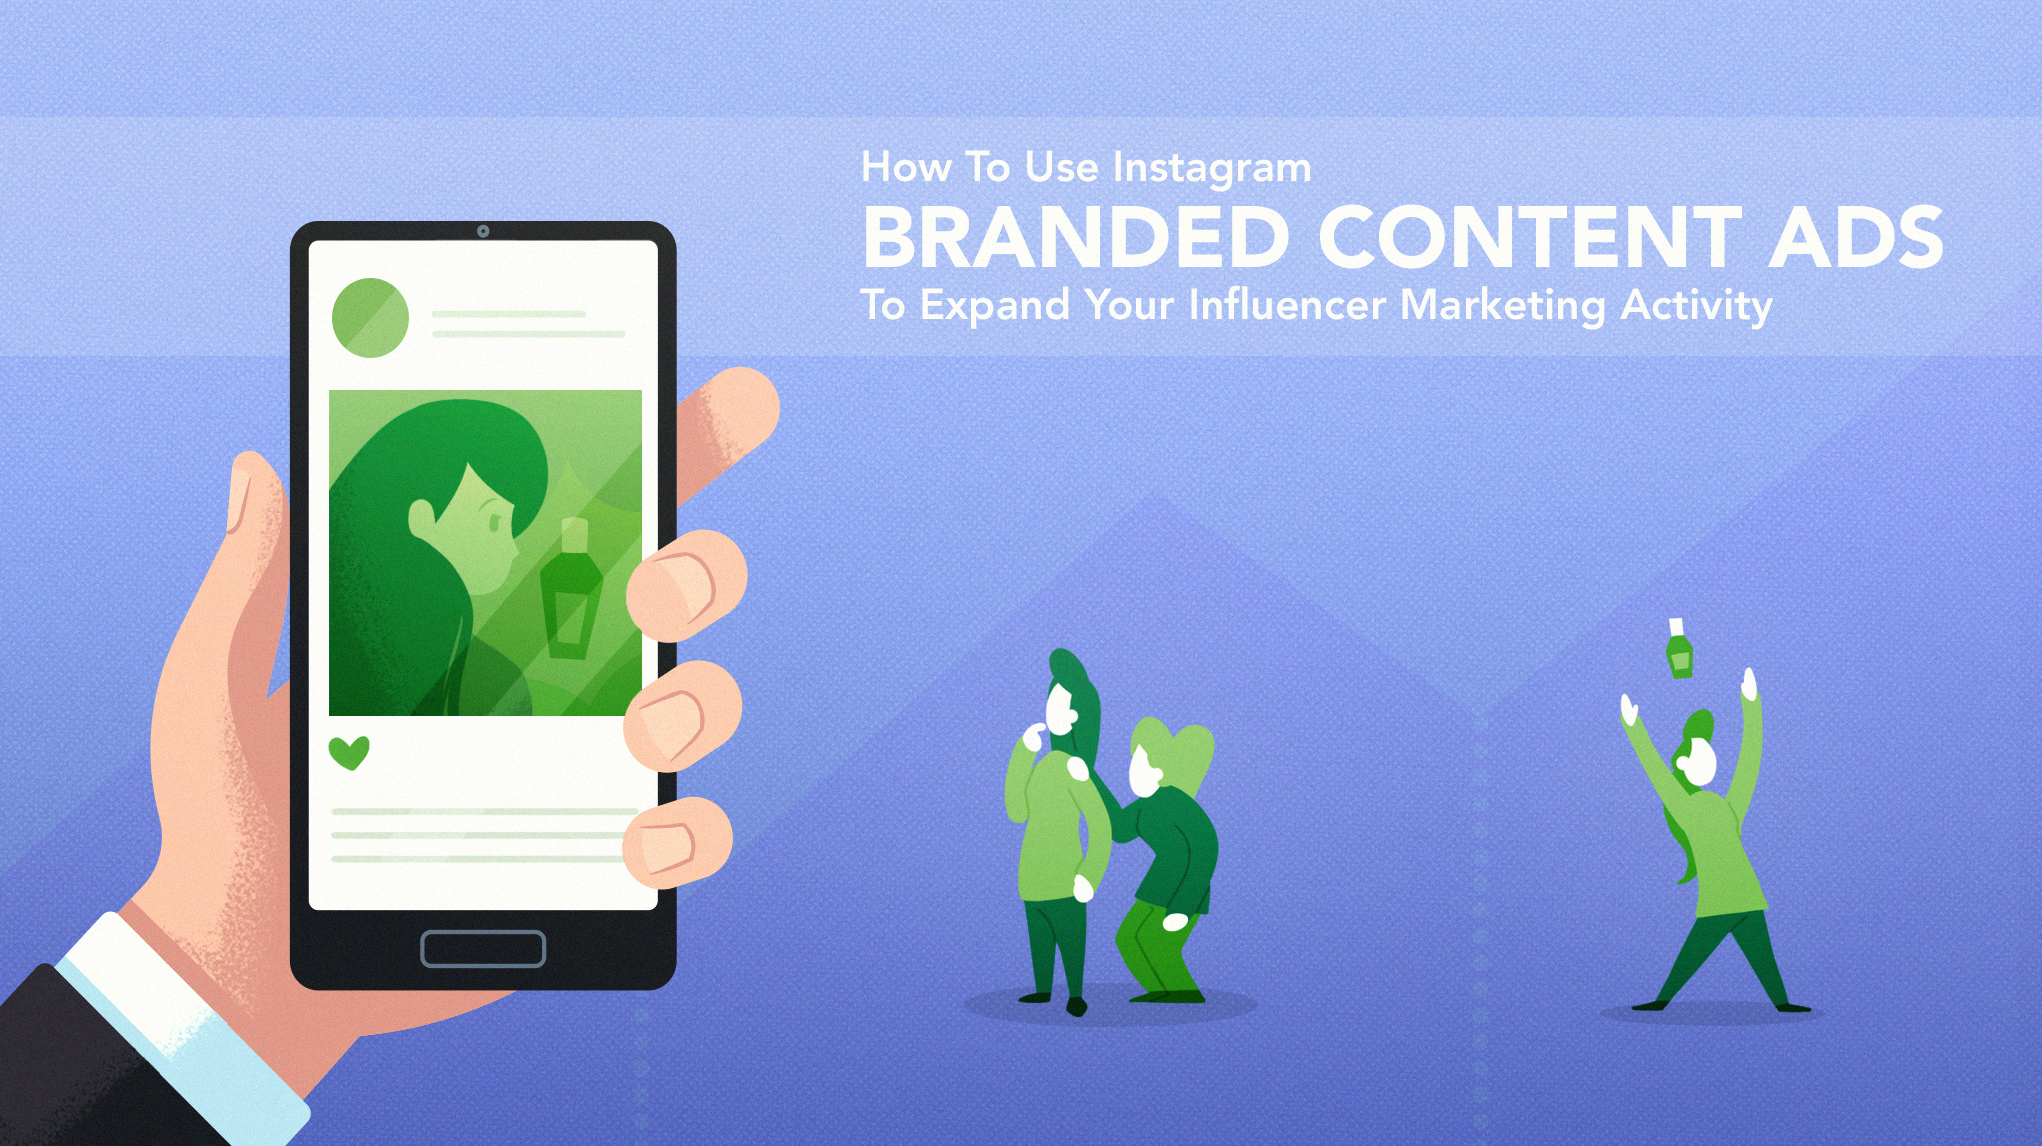 How To Use Instagram Branded Content Ads To Expand Your Influencer Marketing Activity